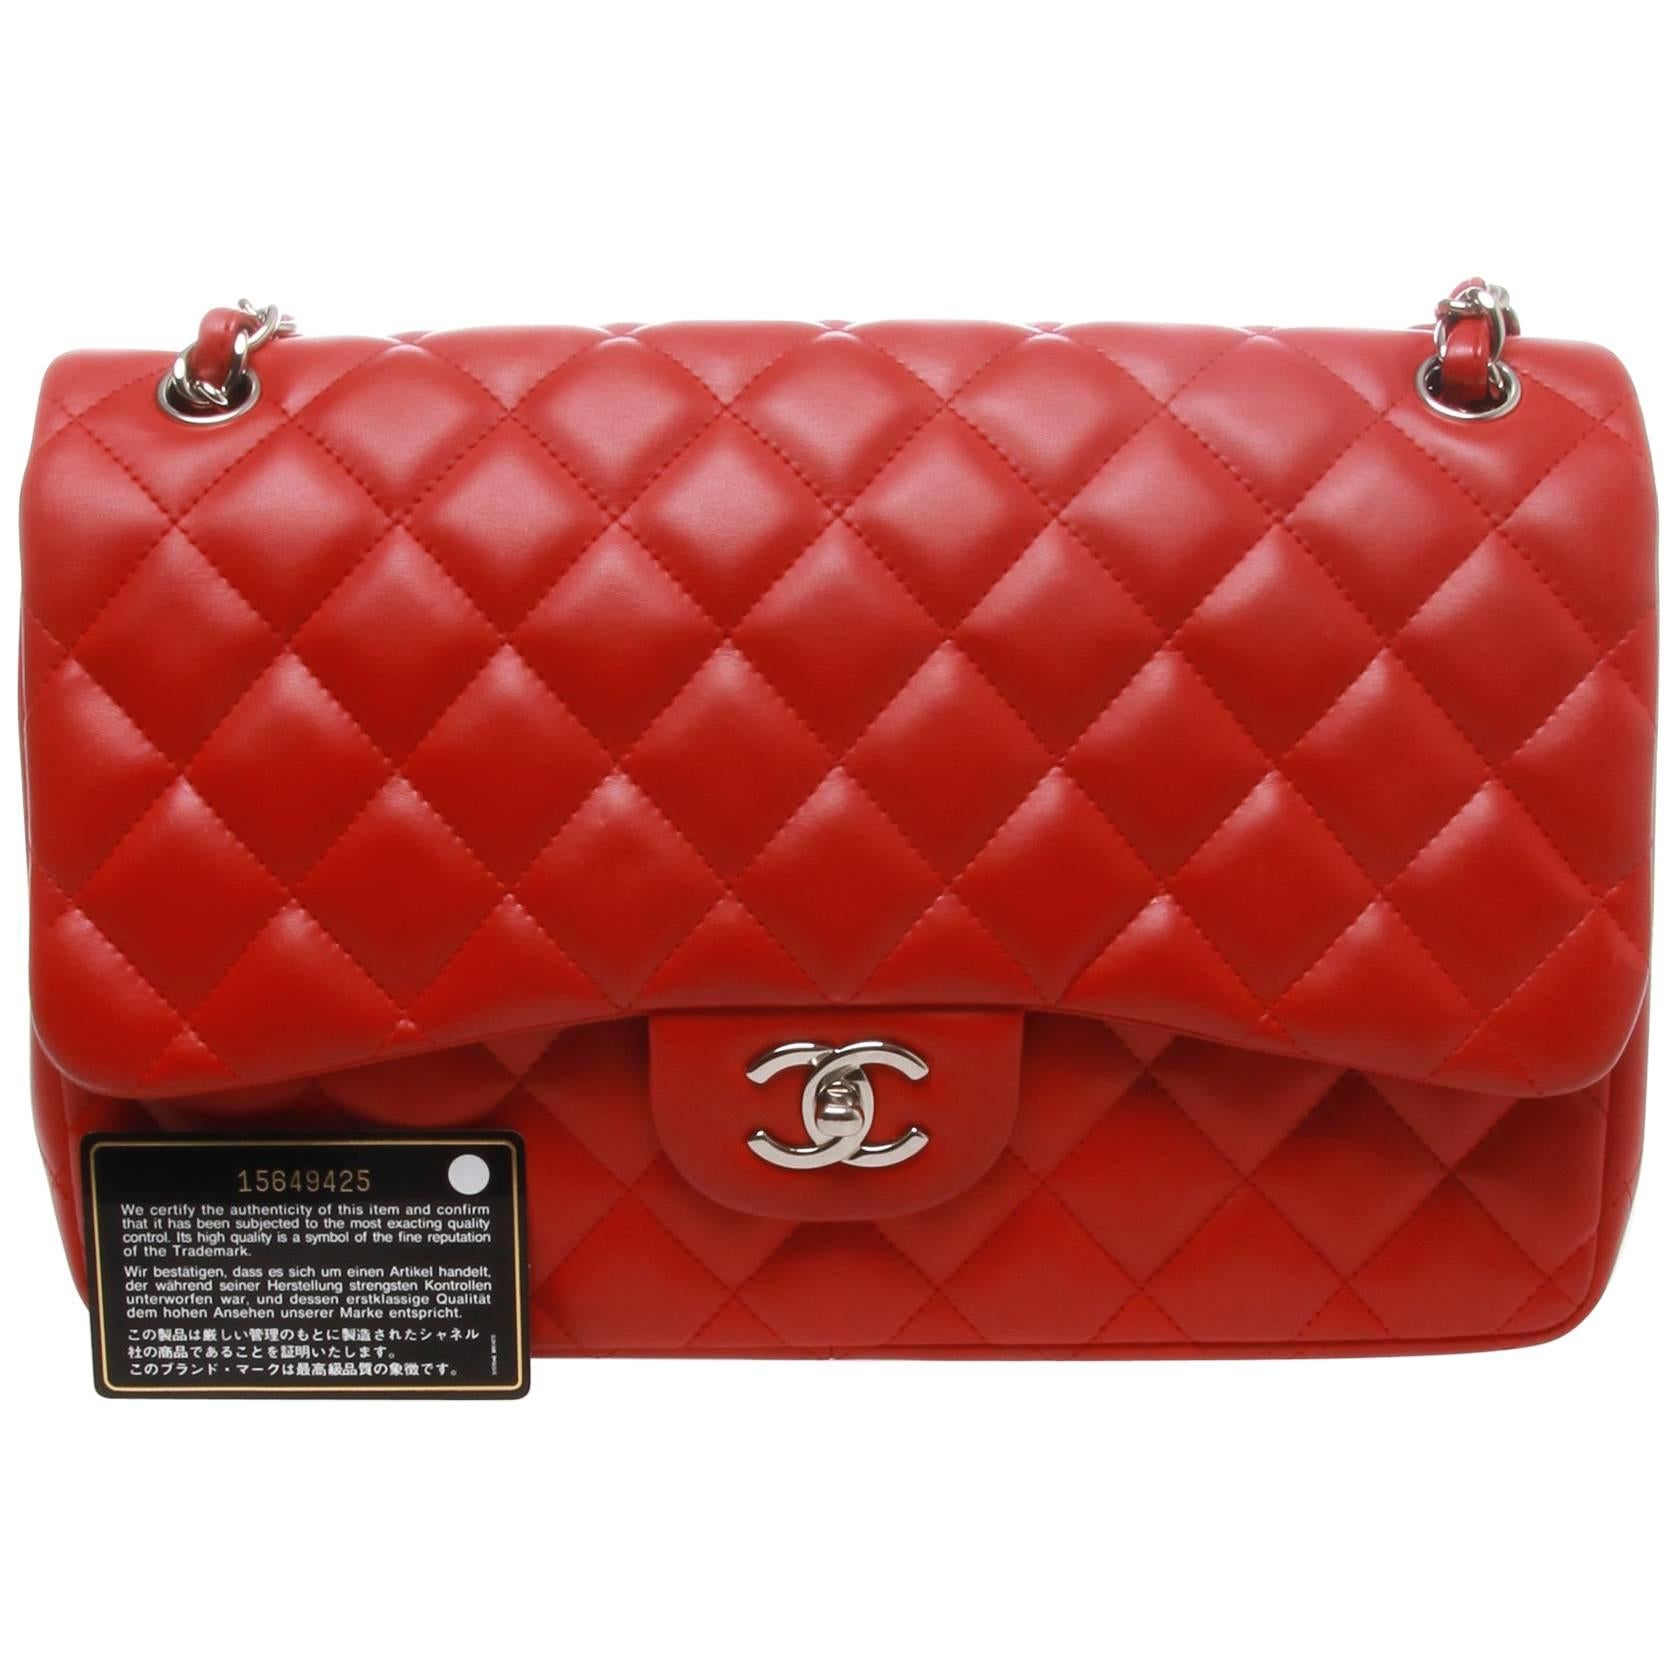 Chanel Lipstick Red Quilted Lambskin Leather Jumbo 2.55 Double Flap Bag